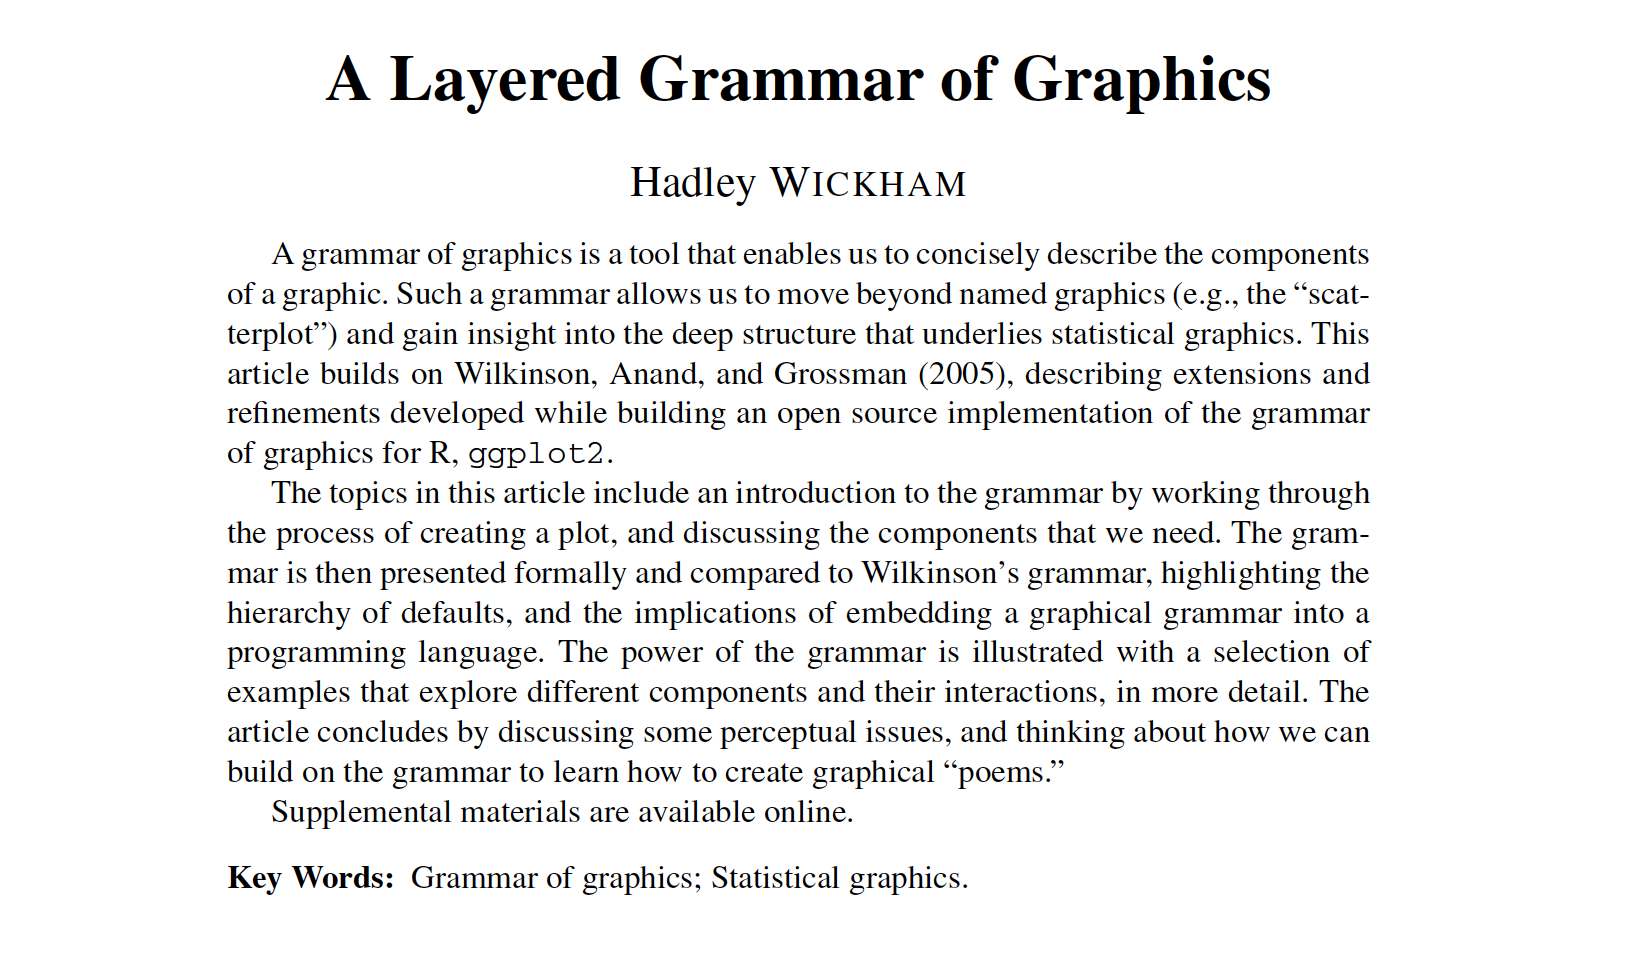 Abstract of Grammar of Graphics paper by Hadley Wickham.